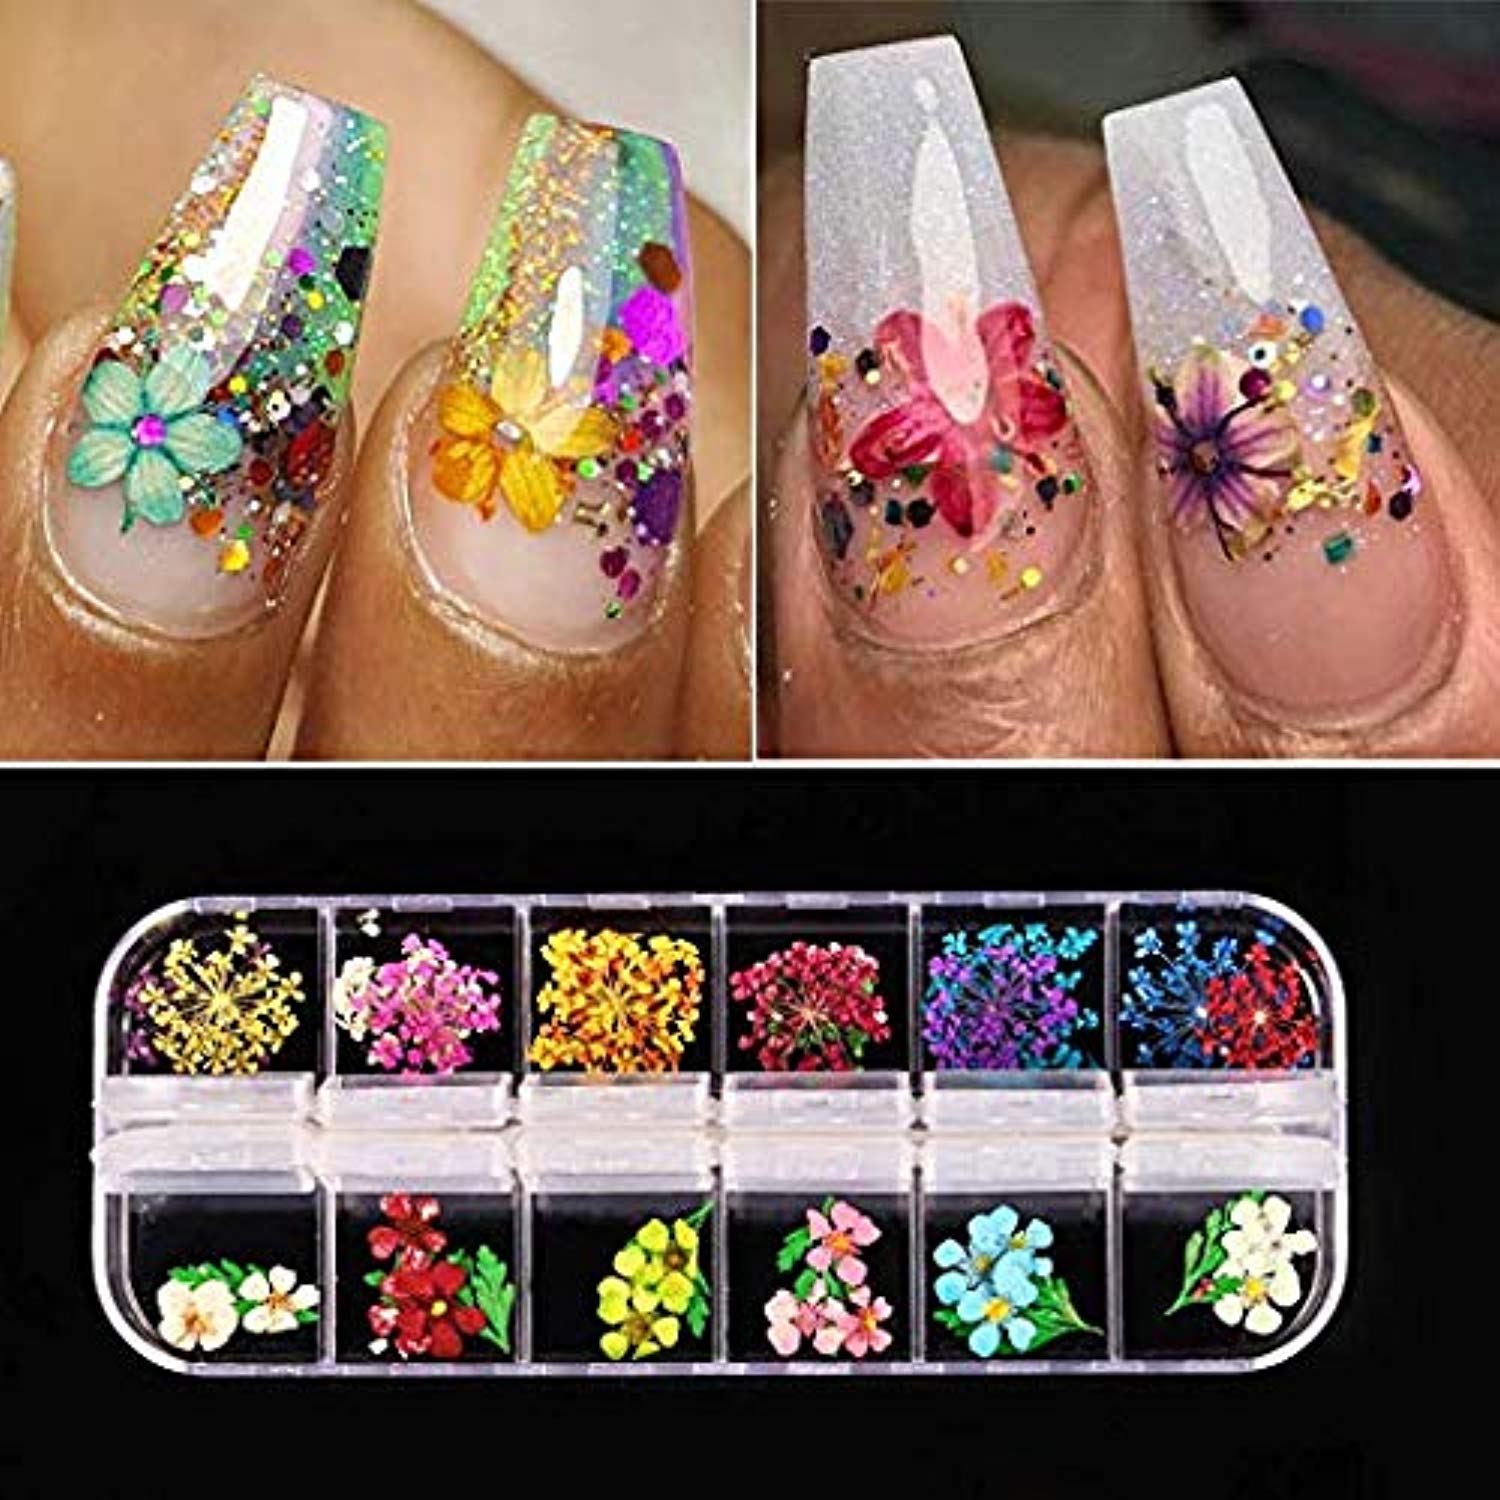 Pressed Dried Flower Nail Art Decoration Hydrangea Floral - Etsy